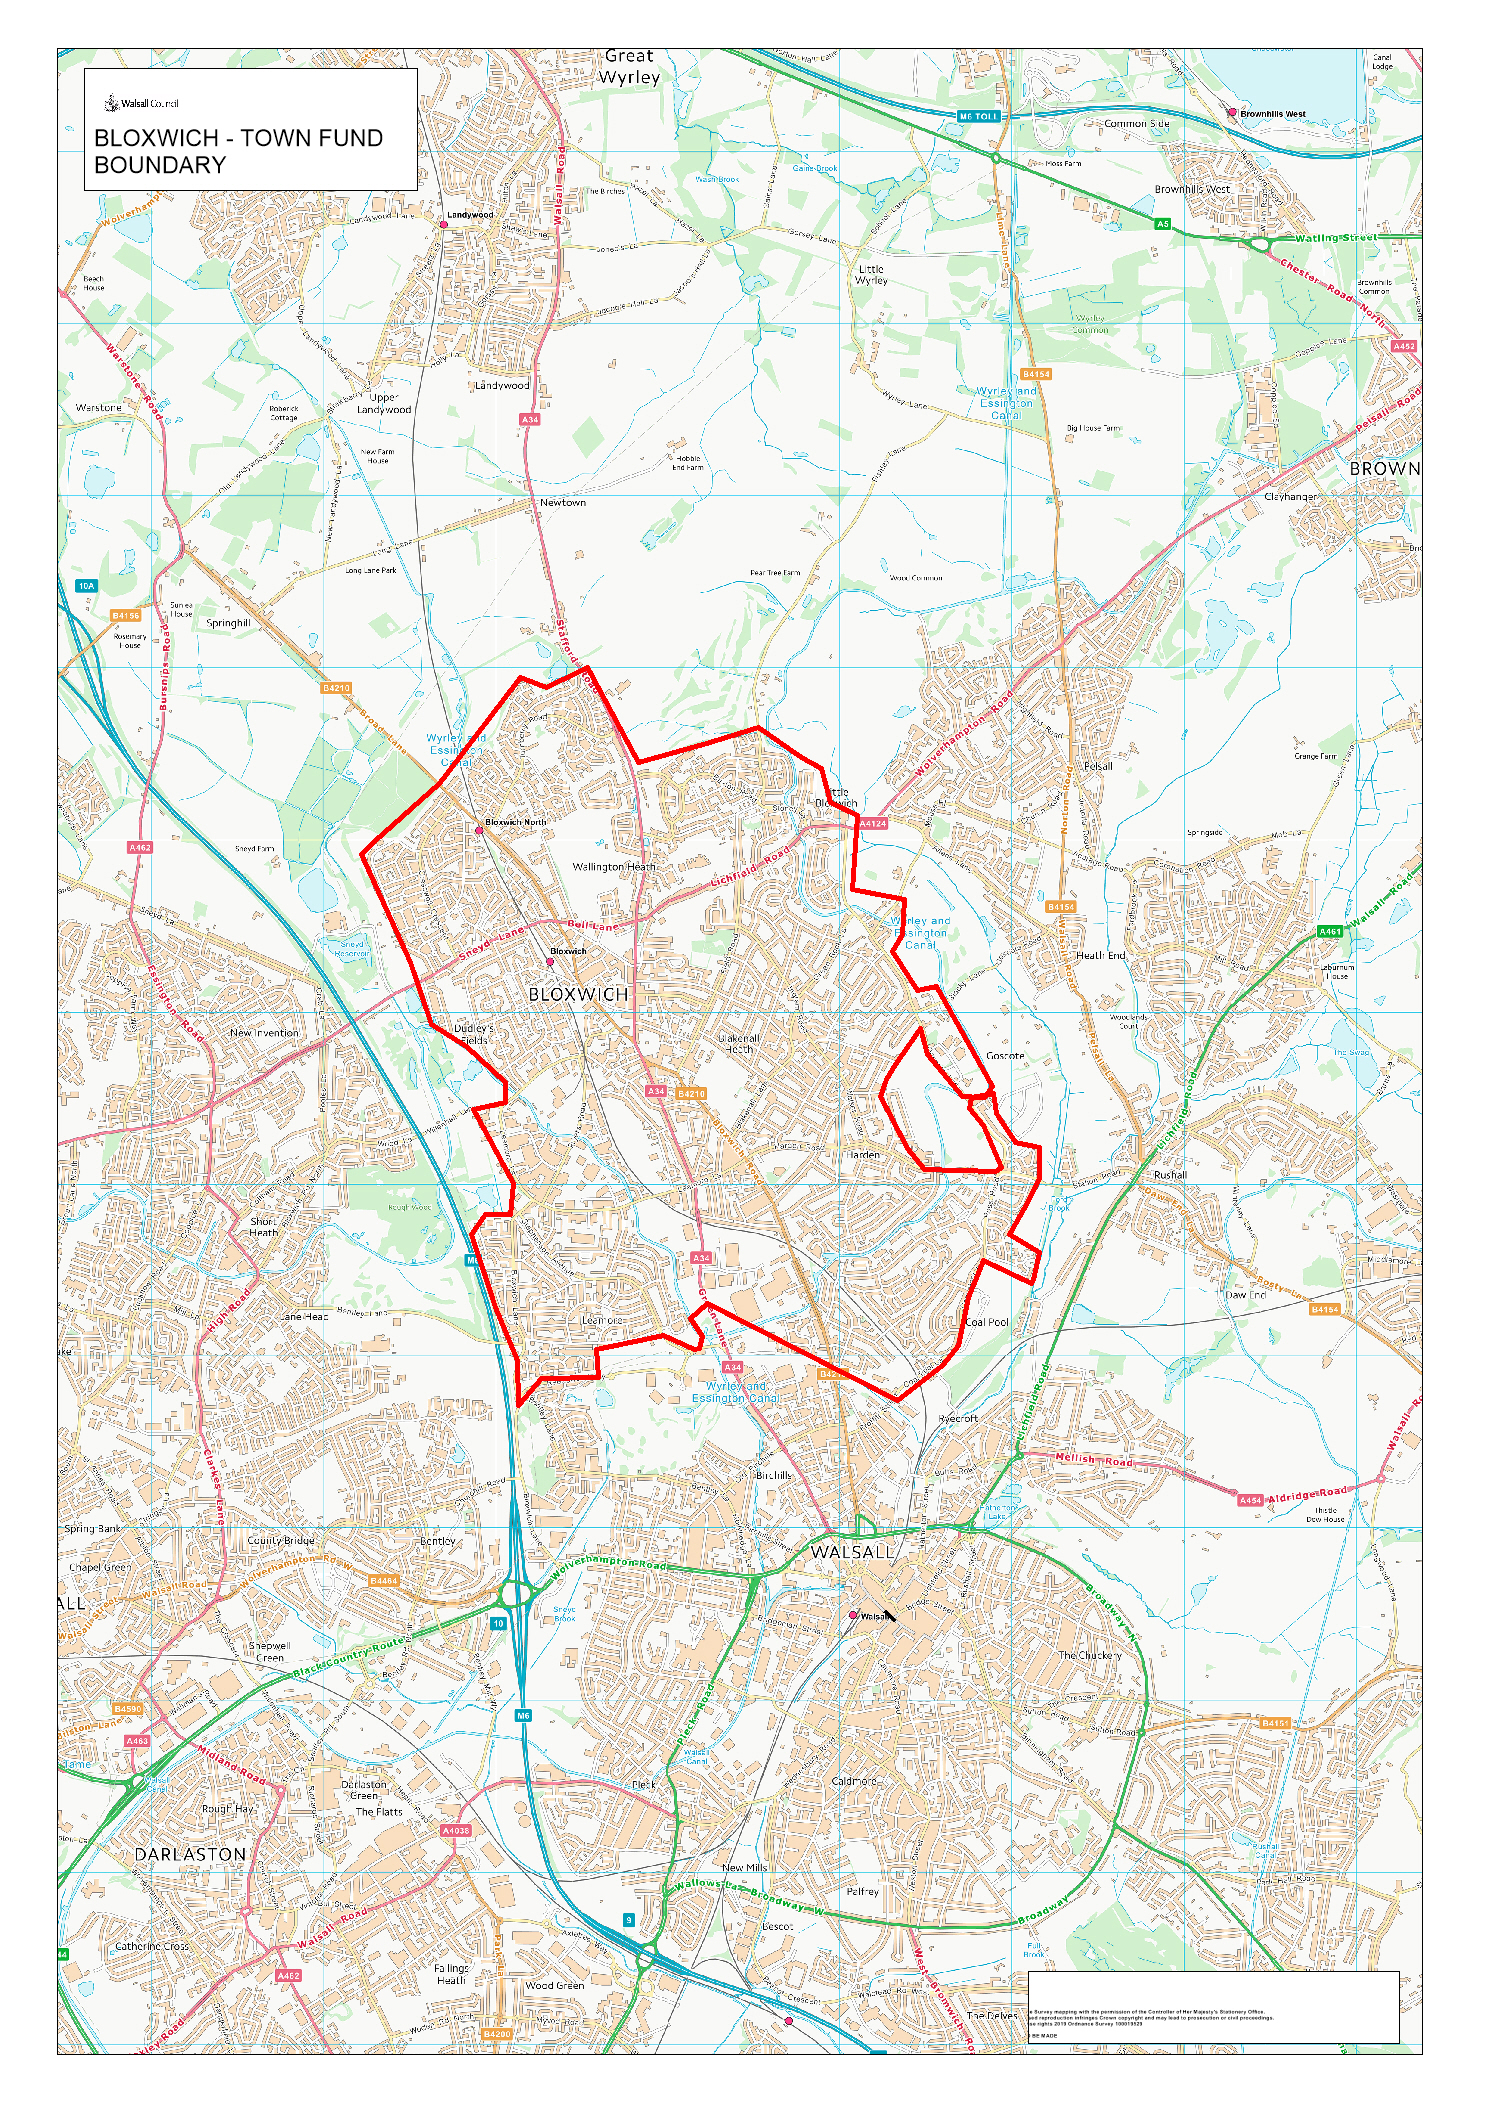 Map of Bloxwich area, including town centre, Bloxwich North, Blakenhall Heath, Leamore, Dudley Fields and Harden